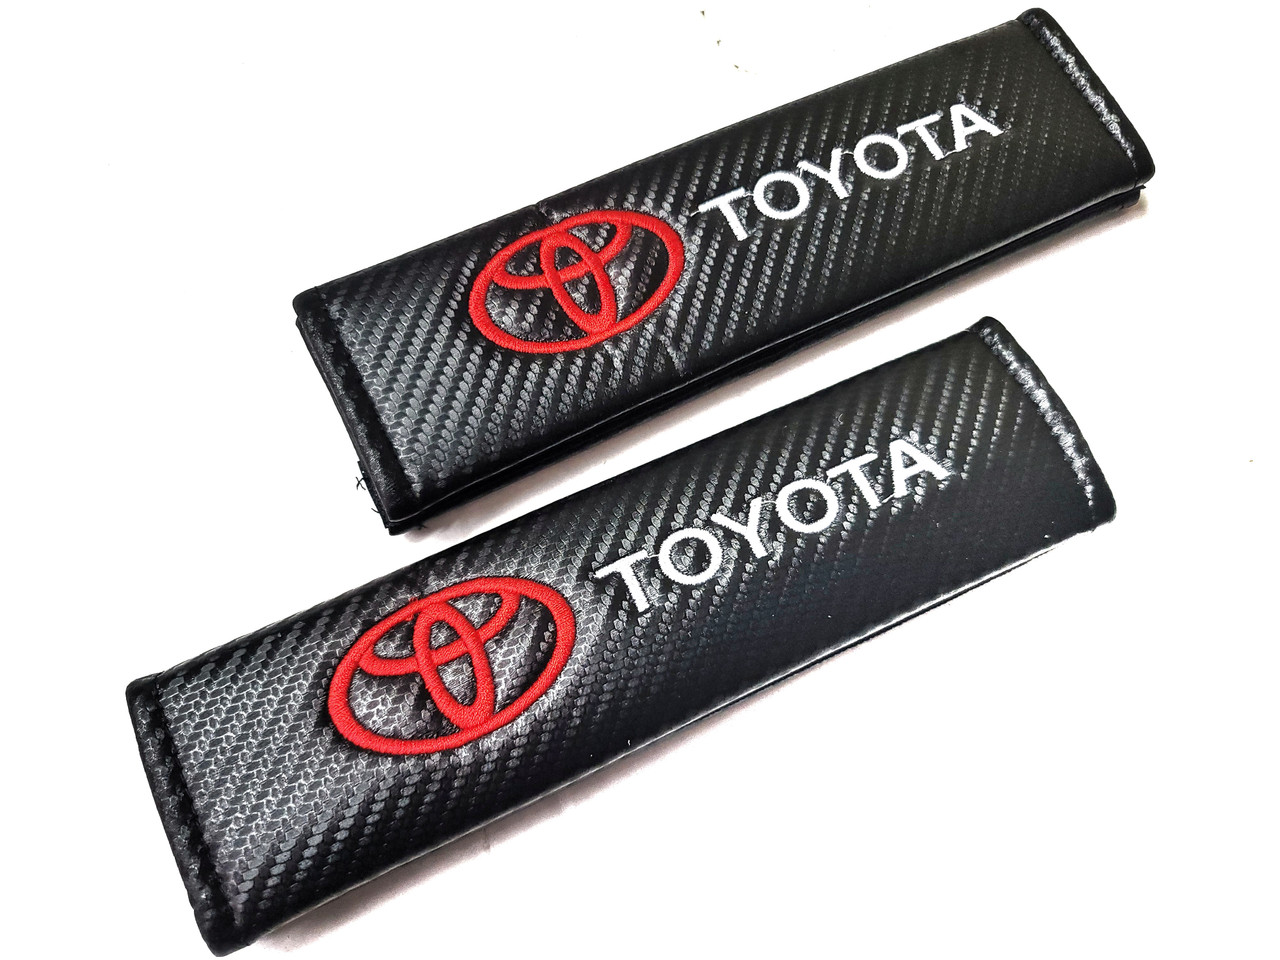 GetUSCart- HEYCAR Seat Belt Covers for Toyota - 2 Pcs Black Carbon Fiber  Car Seatbelt Shoulder Strap Pads Safety Belt Covers Protective Sleeves with  Printed Toyota Car Logo